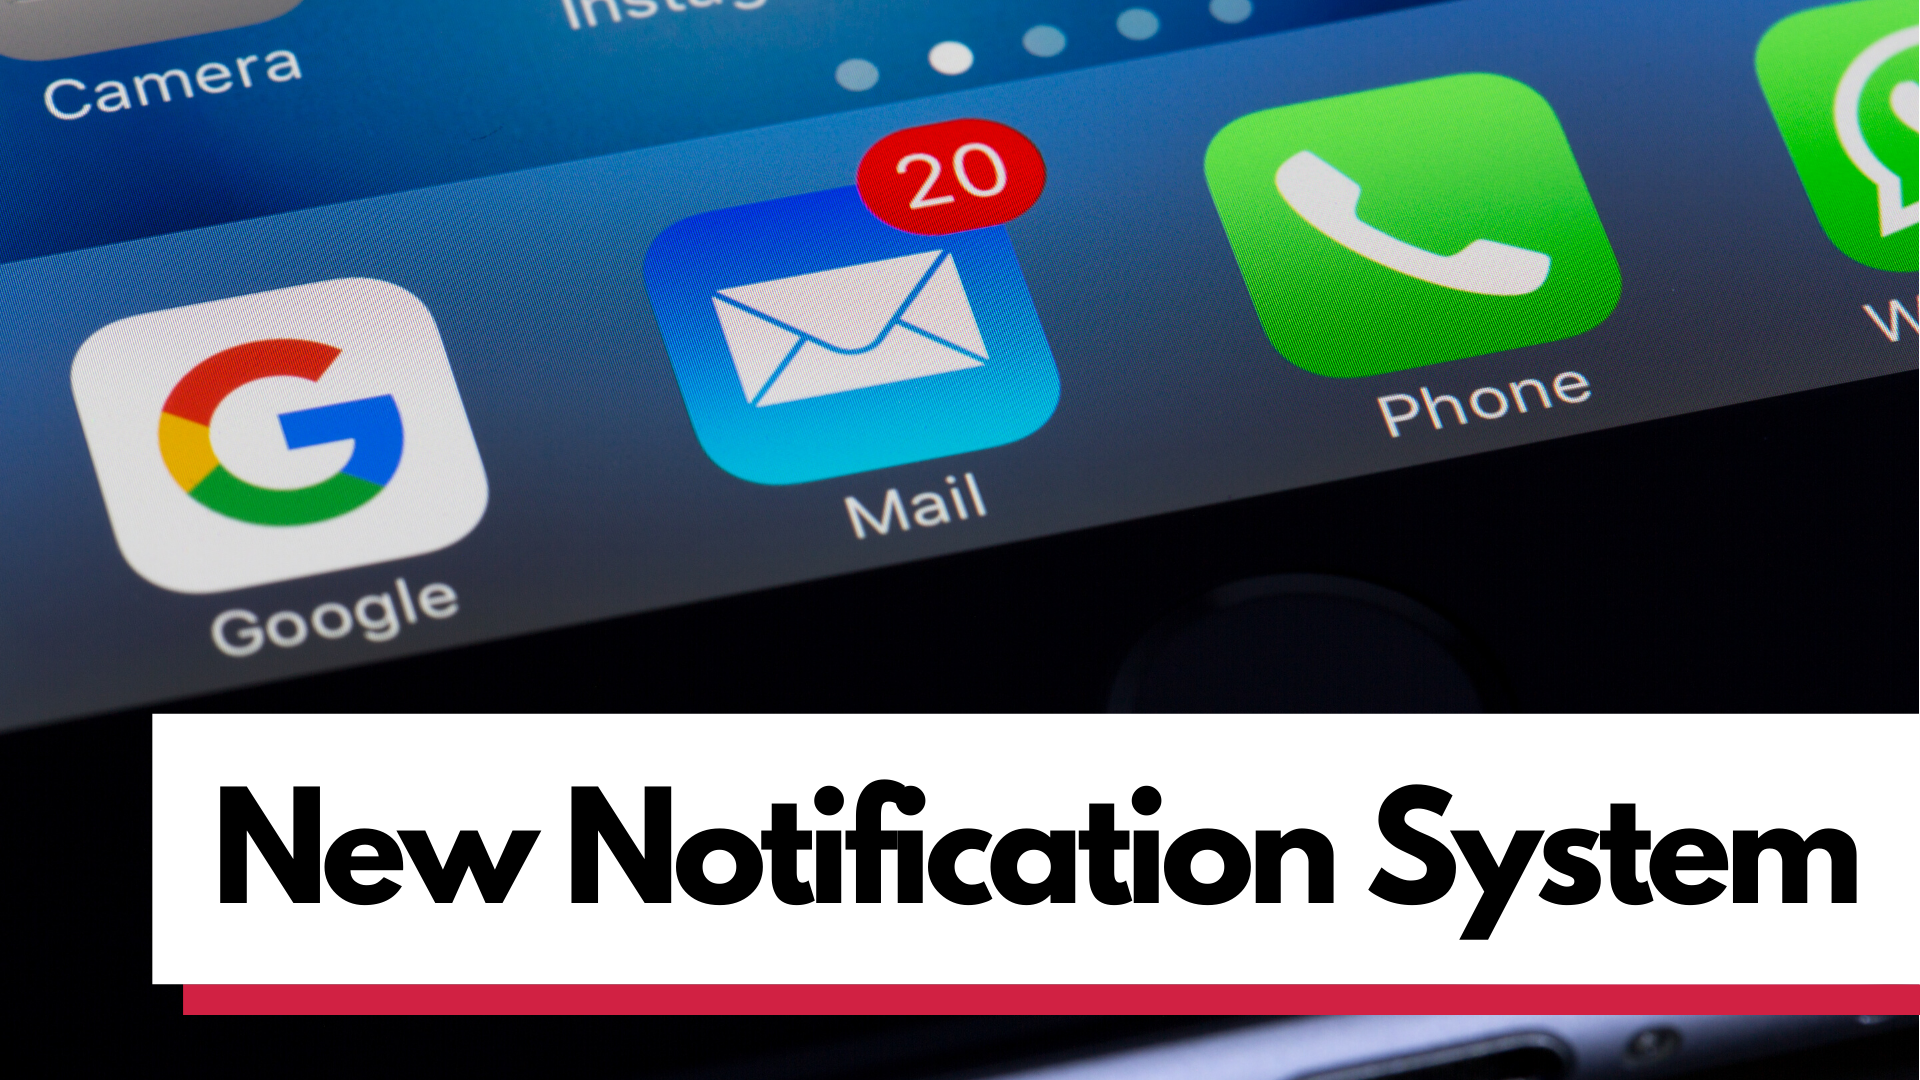 graphic of phone screen with "New Notification System" text